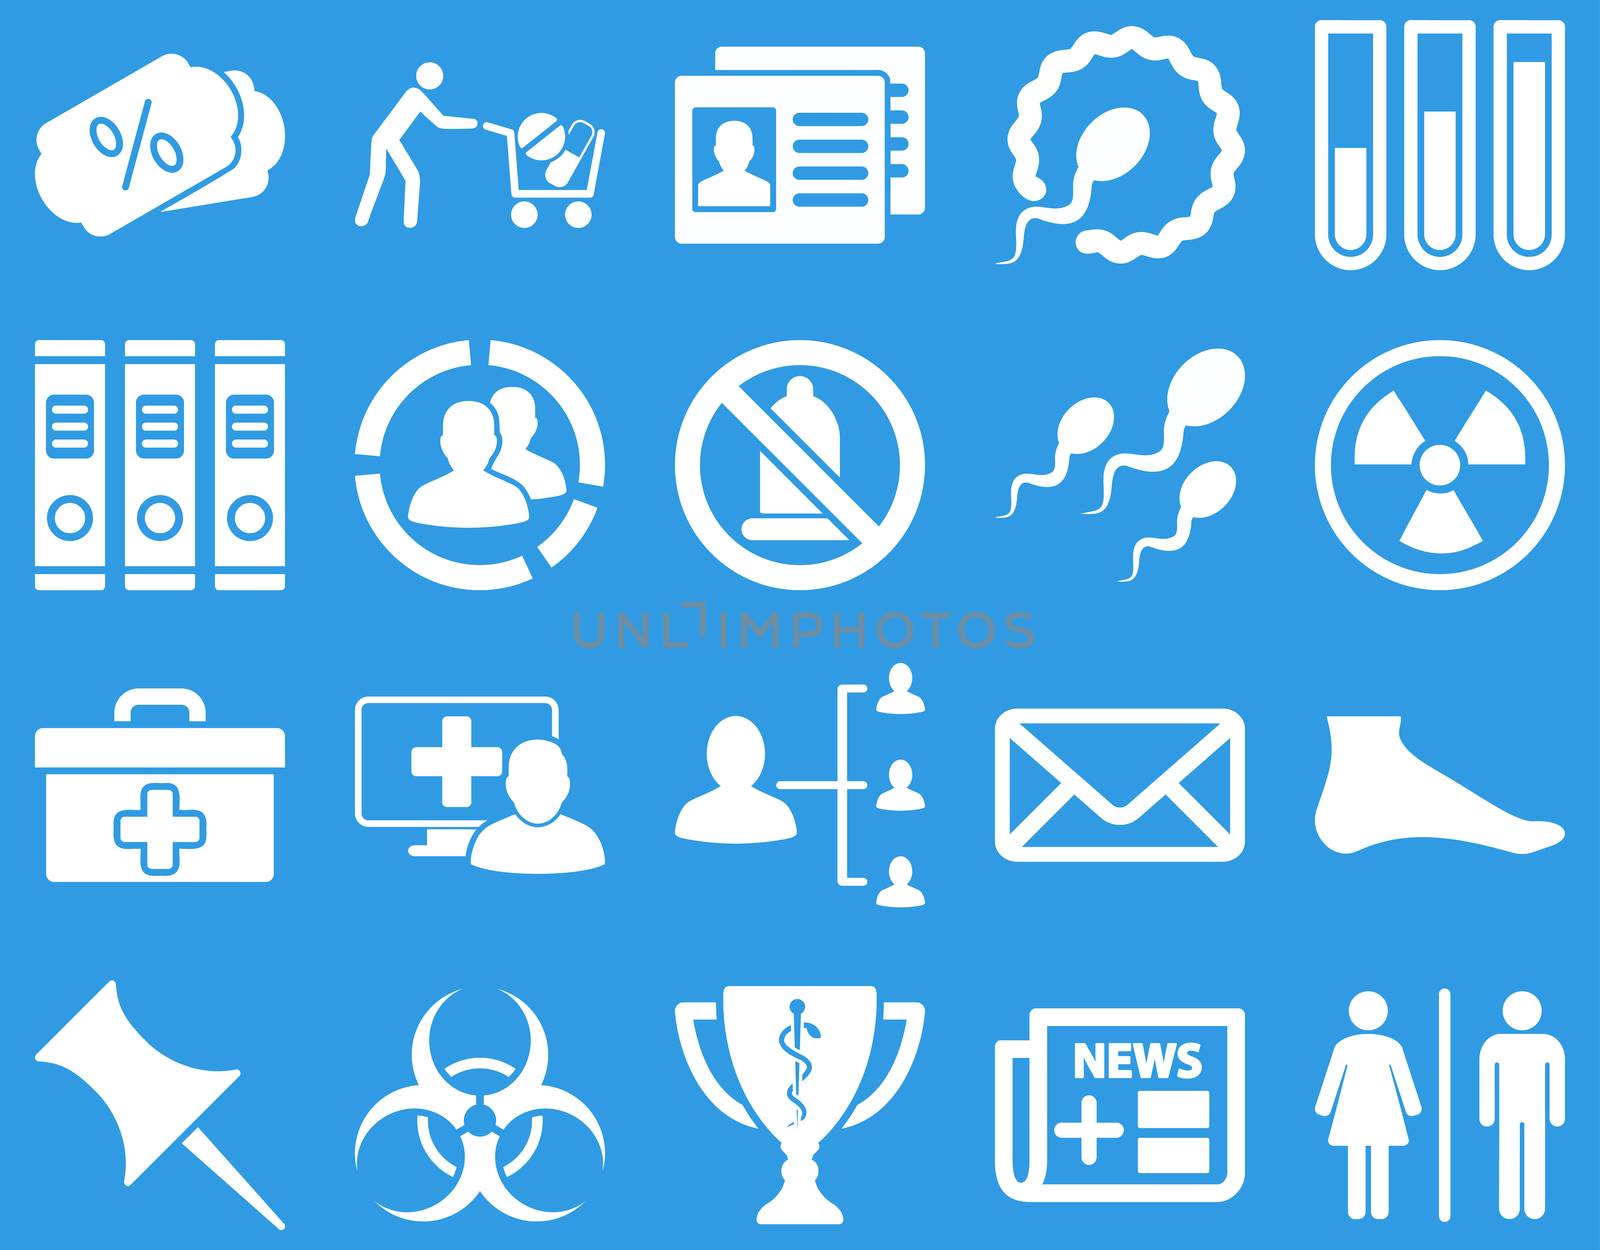 Medical icon set. Style: icons drawn with white color on a blue background.